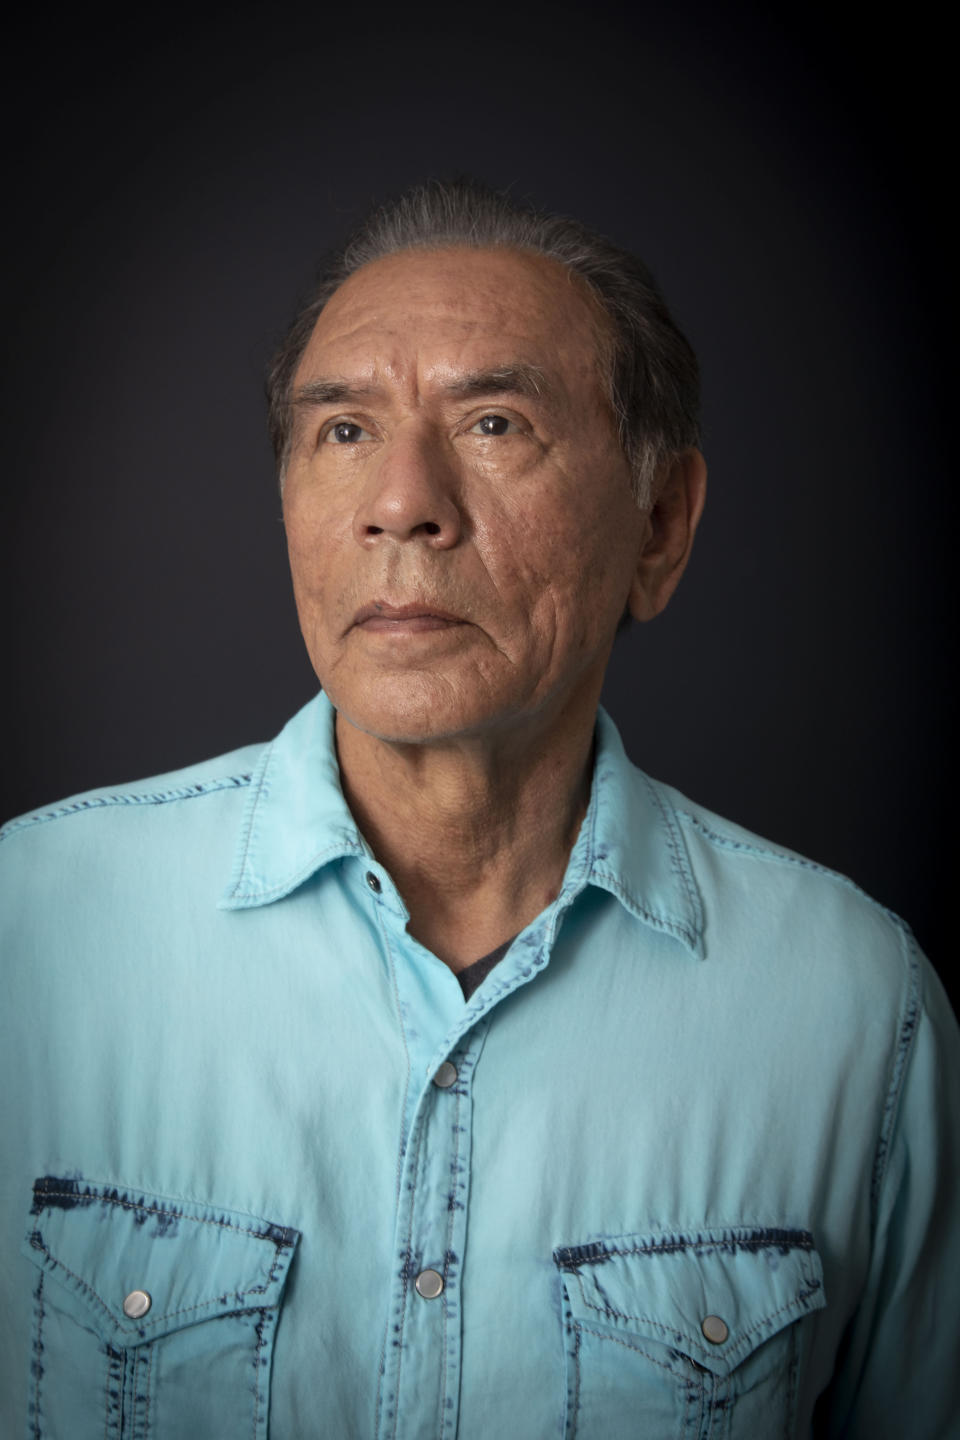 Actor Wes Studi poses for a portrait in New York on June 14, 2022, to promote his film "A Love Song." (Photo by Andy Kropa/Invision/AP)